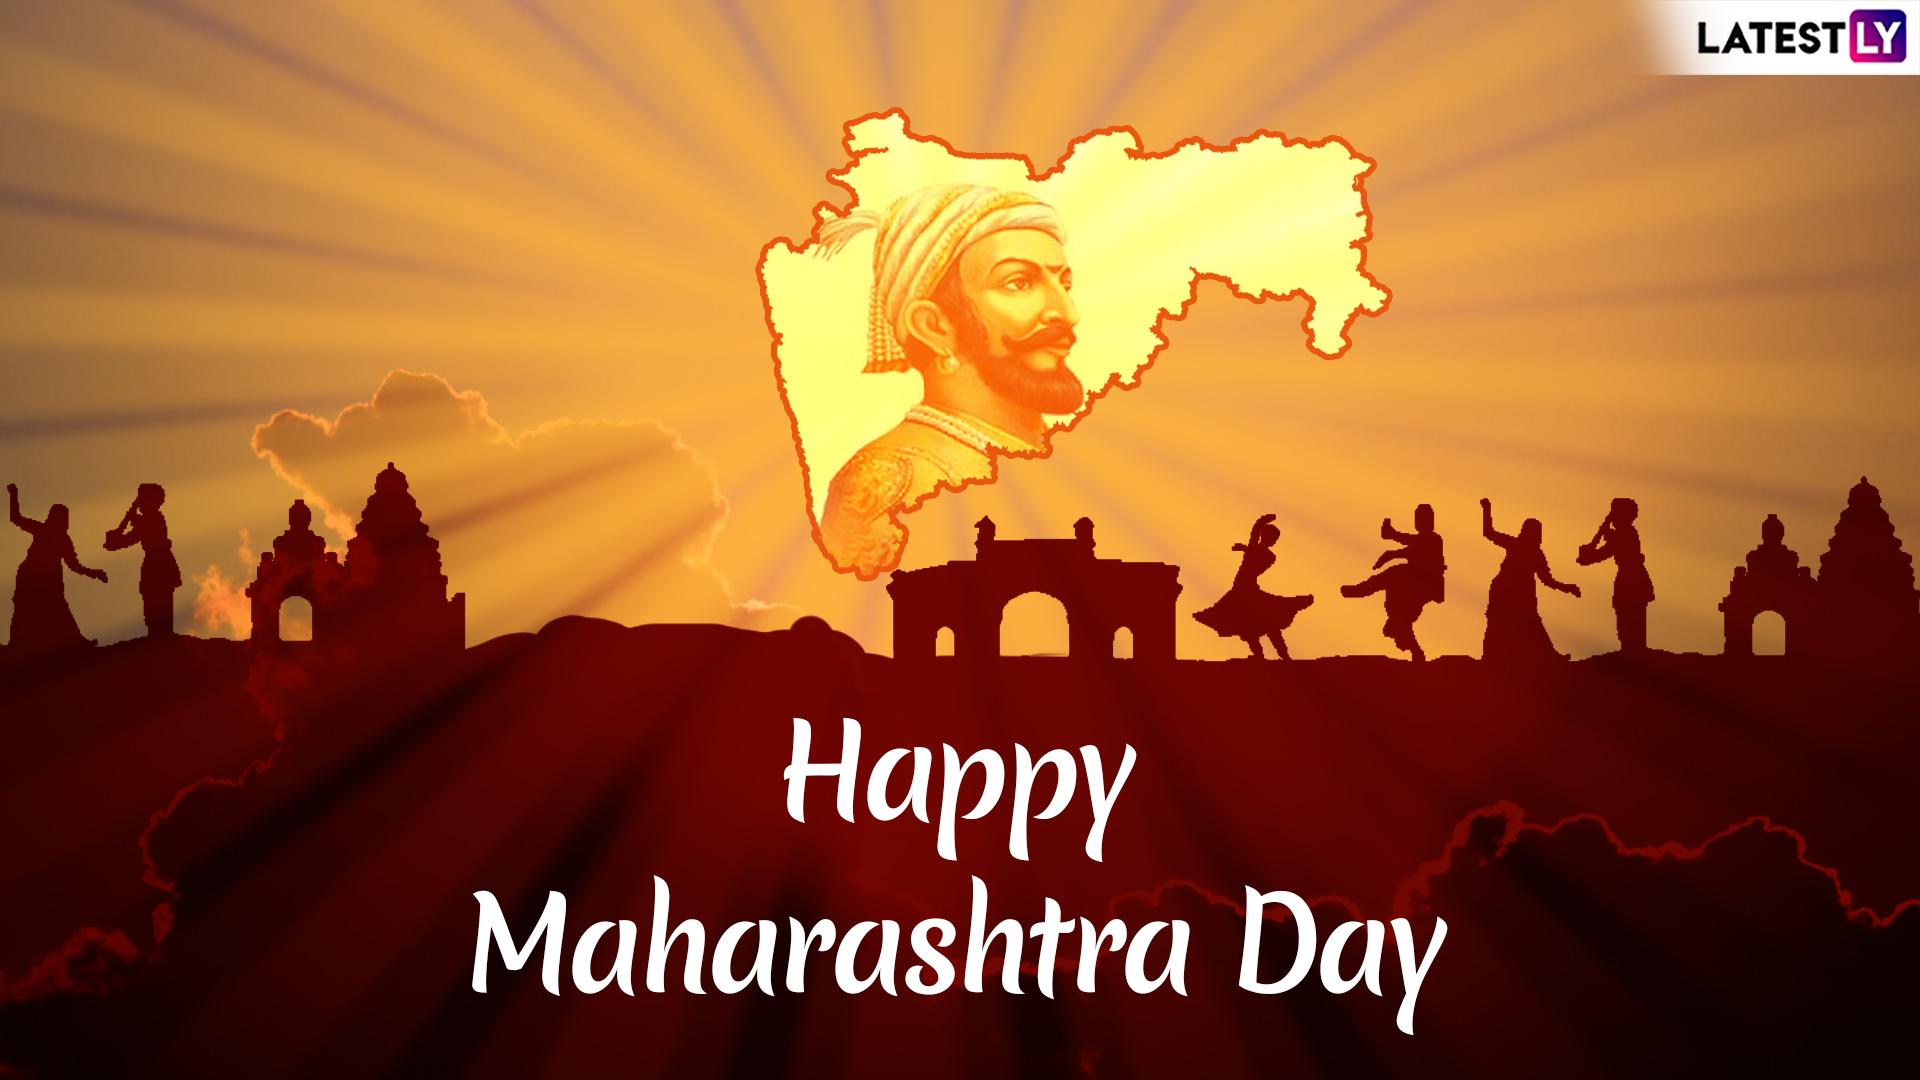 Maharashtra Day Image & HD Wallpaper With Quotes for Free